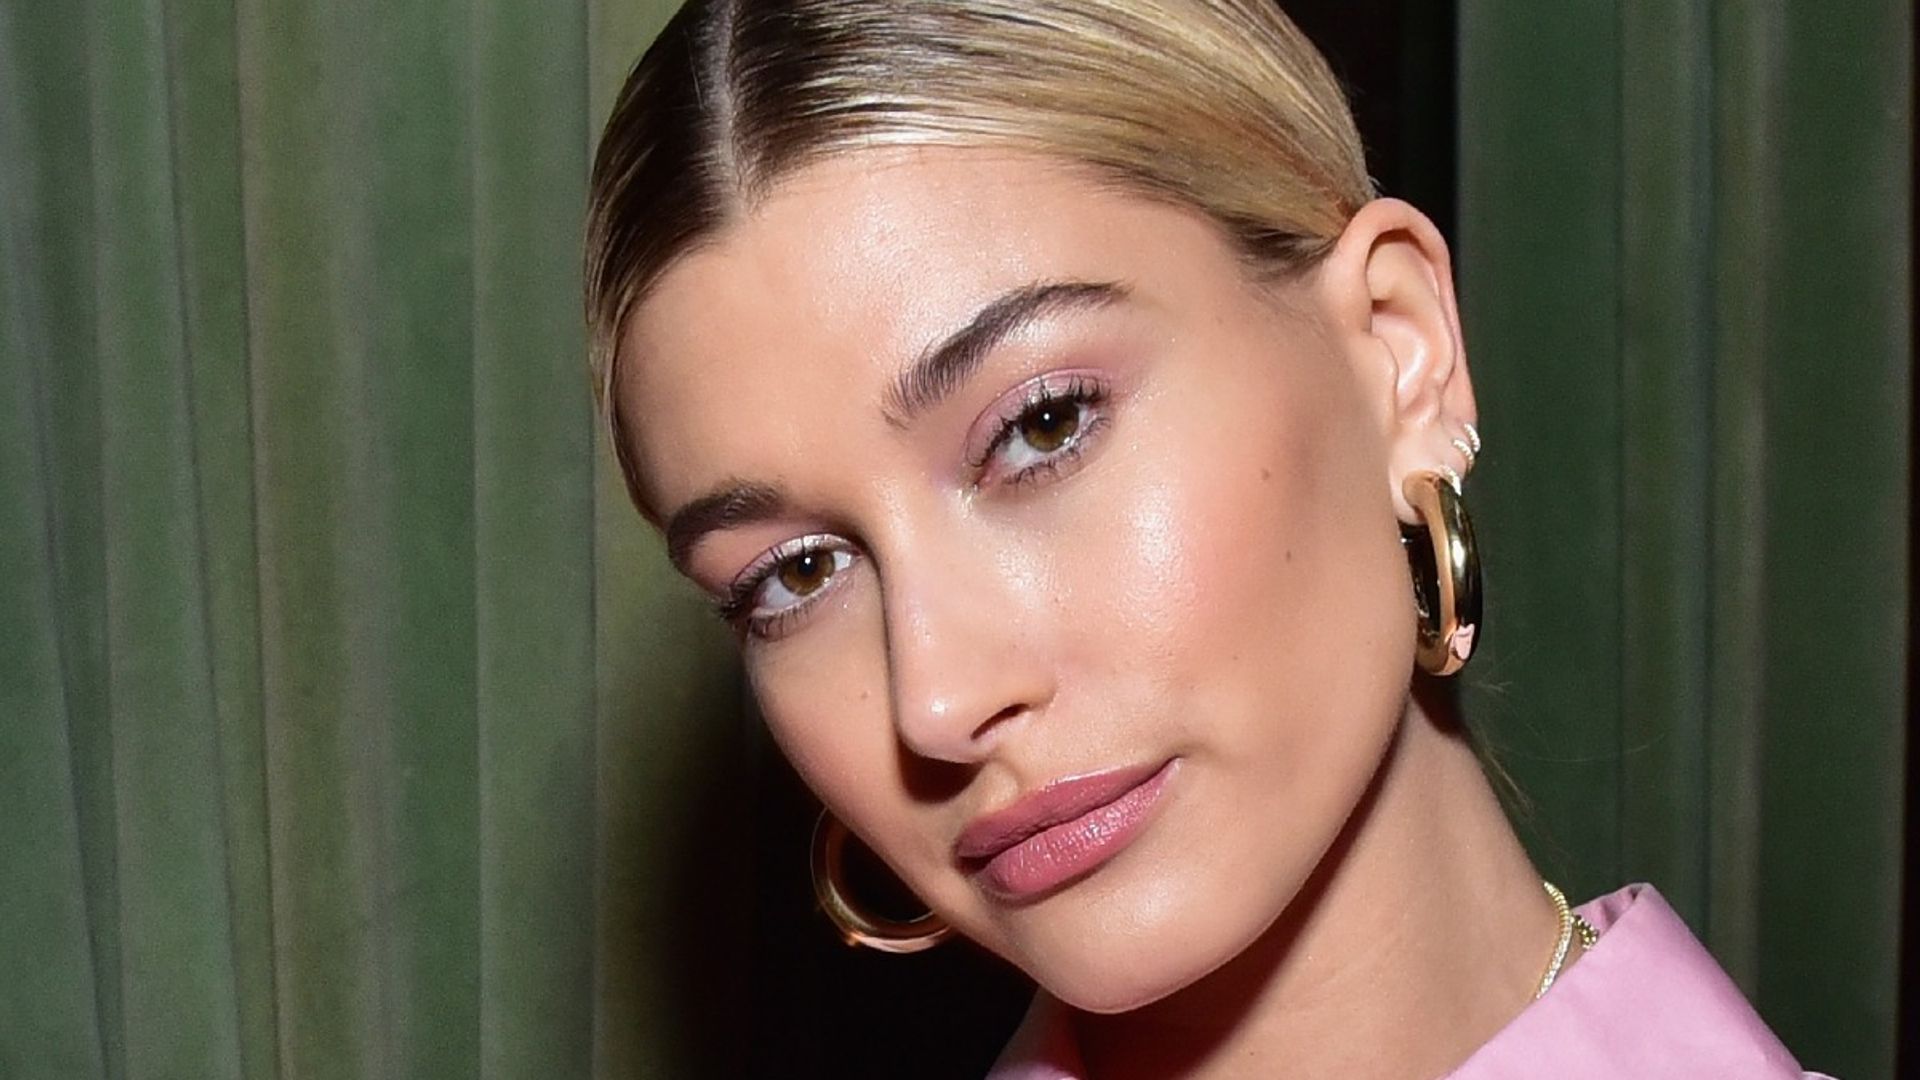 Hailey Bieber diagnosed with a blood clot on her brain after hospital dash